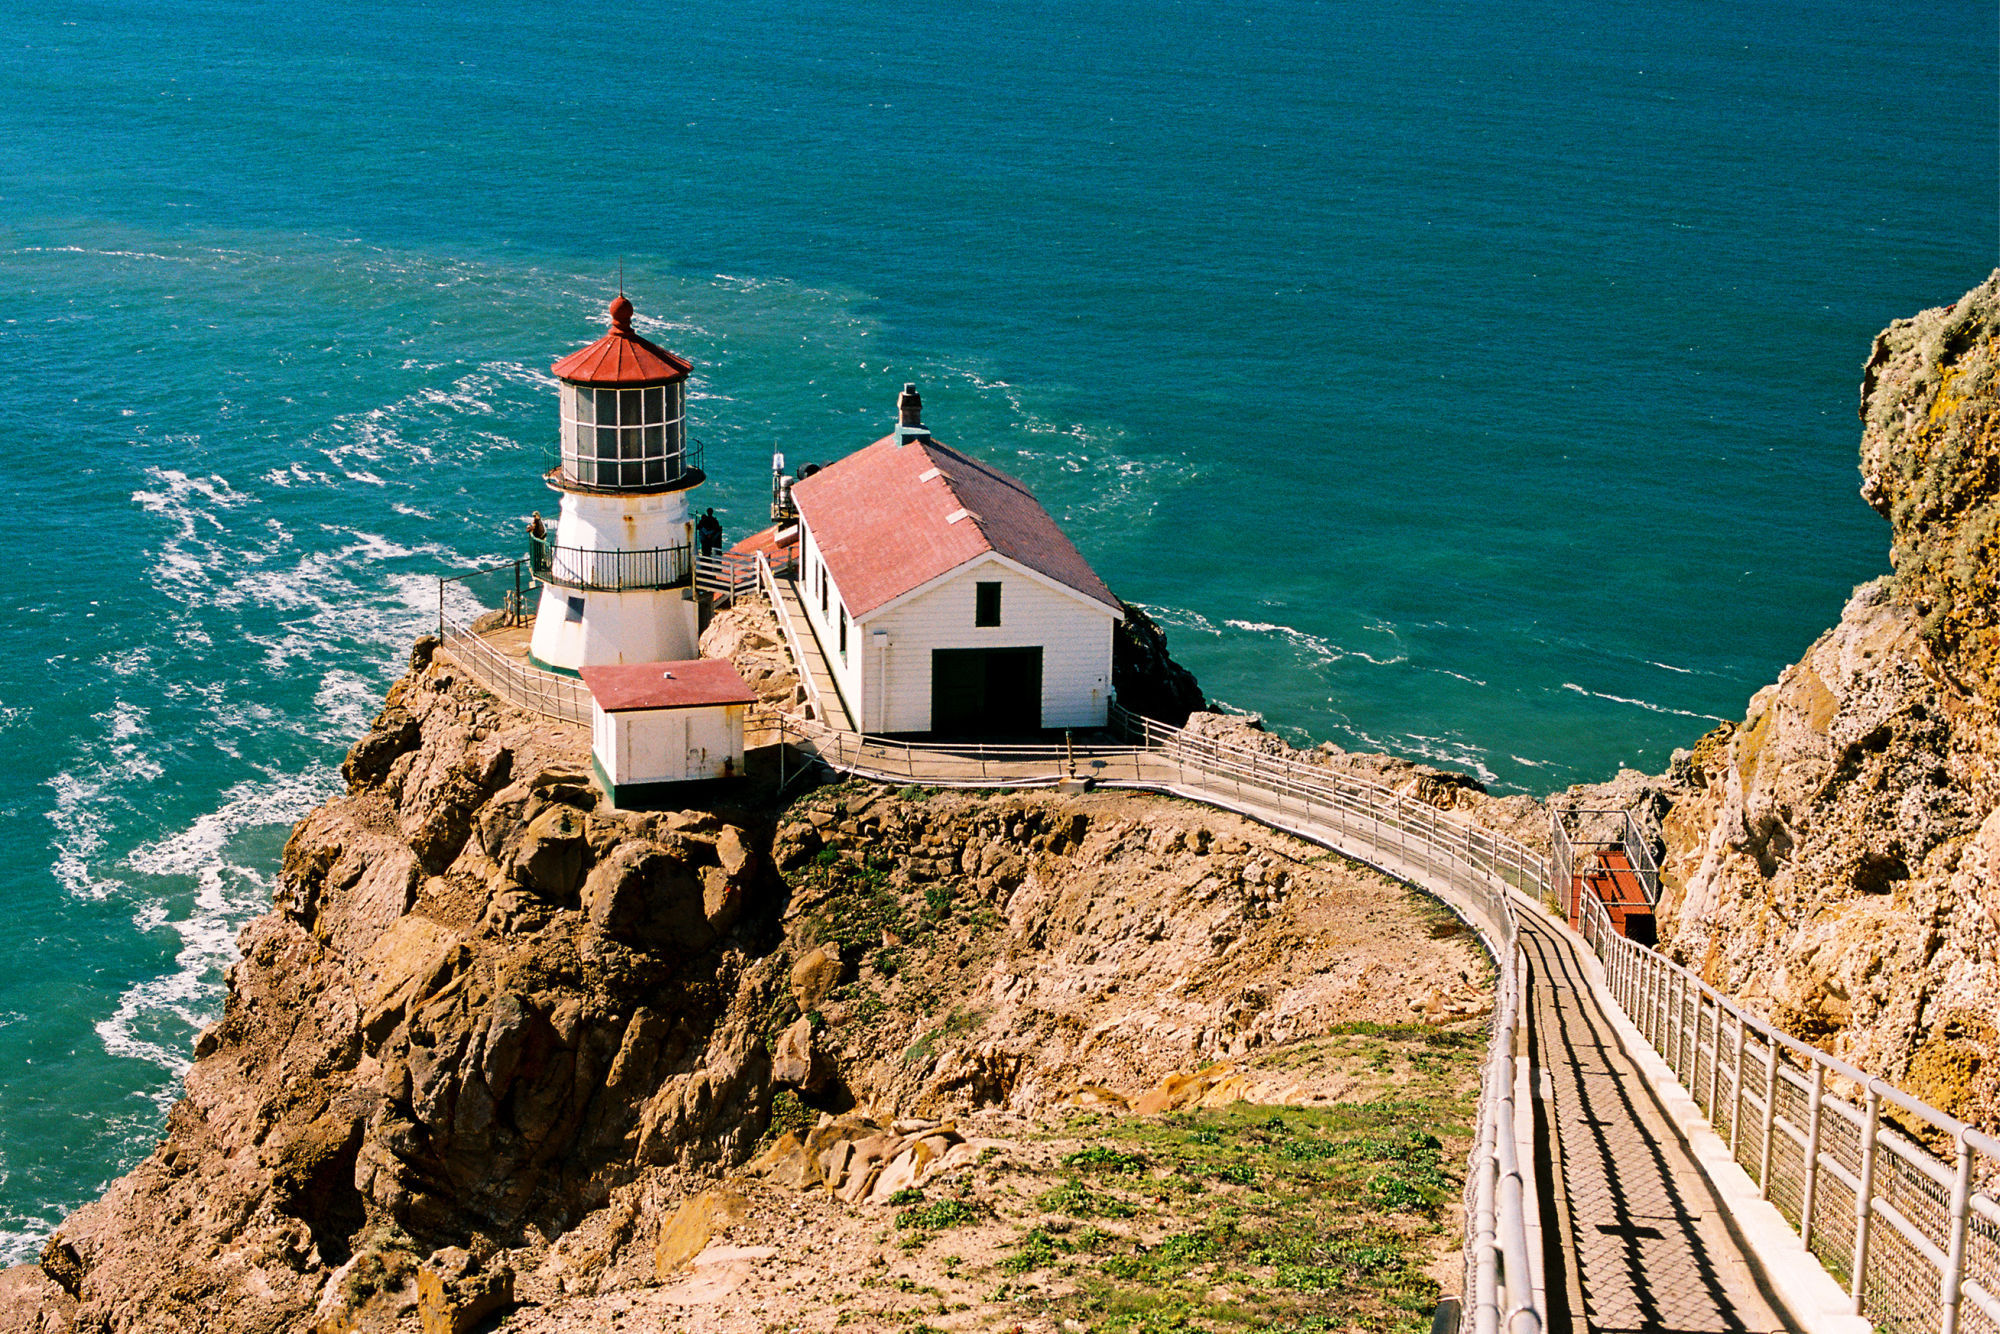 Wes Anderson Fans Will Go Wild for the Point Reyes Lighthouse